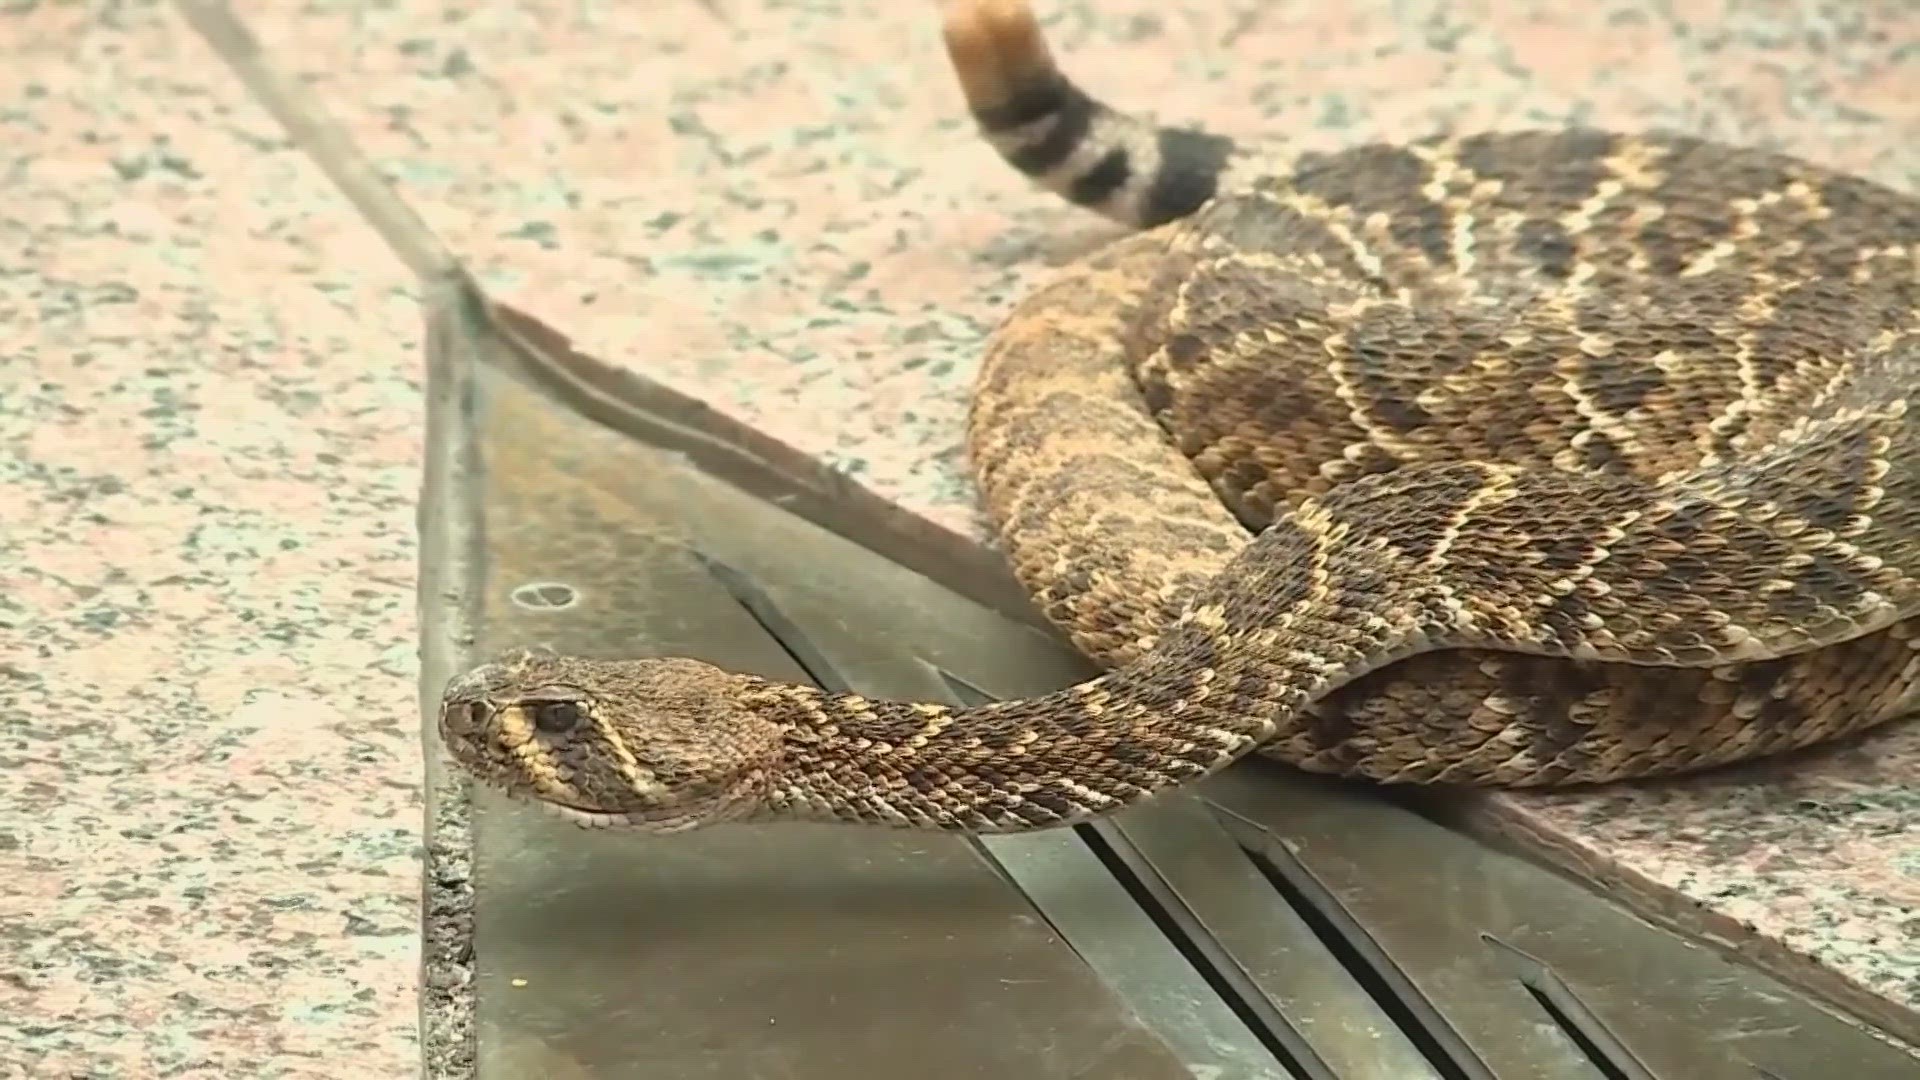 We look at what you should do if you see a snake or if you get bit as snakes become more apparent during the heat.